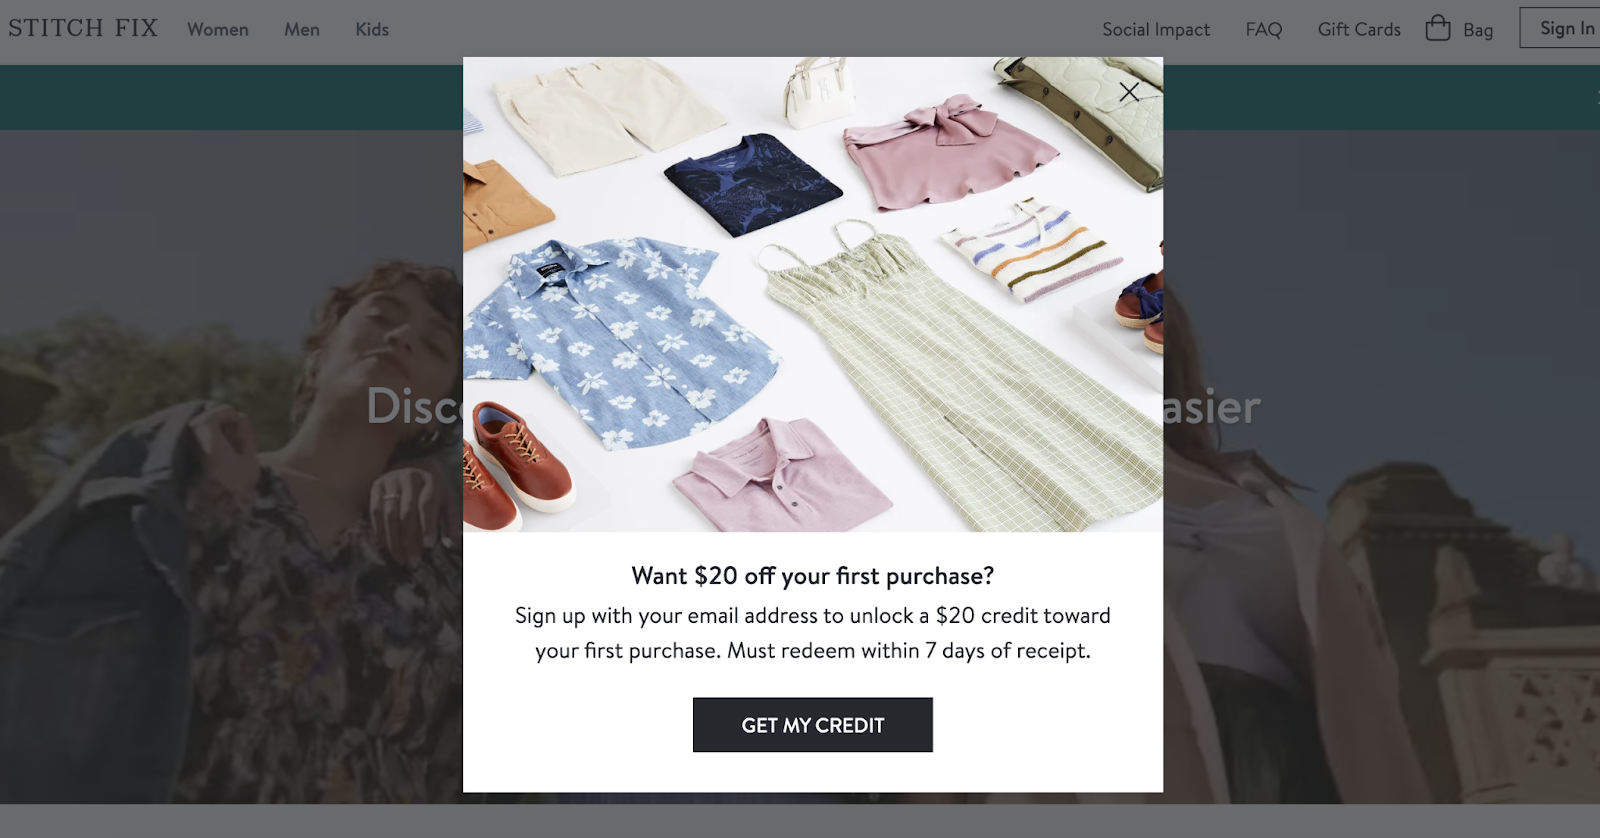 data transparency best practices, stitchfix discount in exchange for email